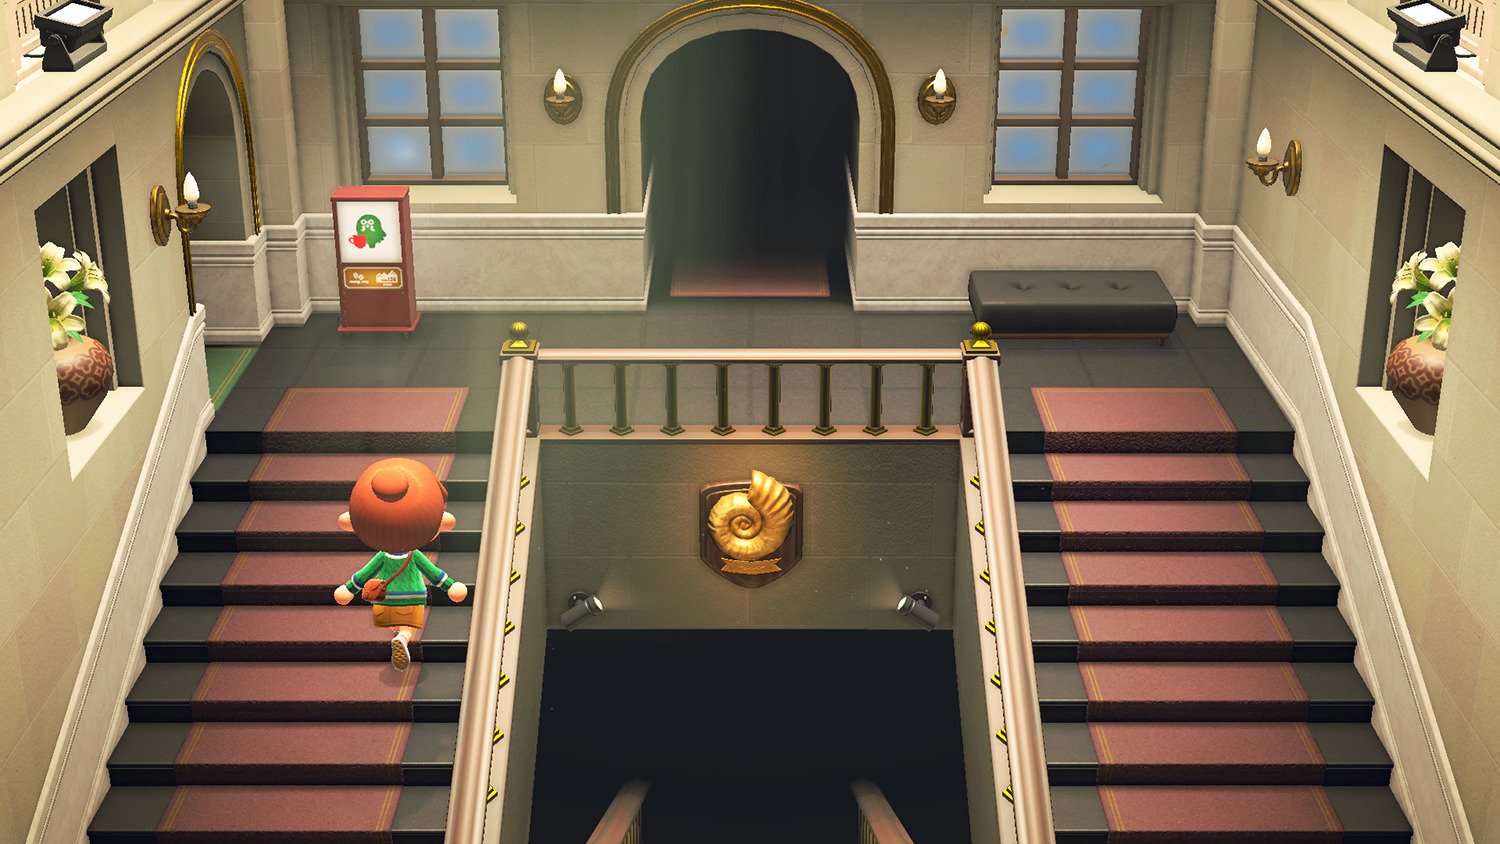 Animal Crossing: New Horizons Brewster update; player climbs Museum steps to visit The Roost